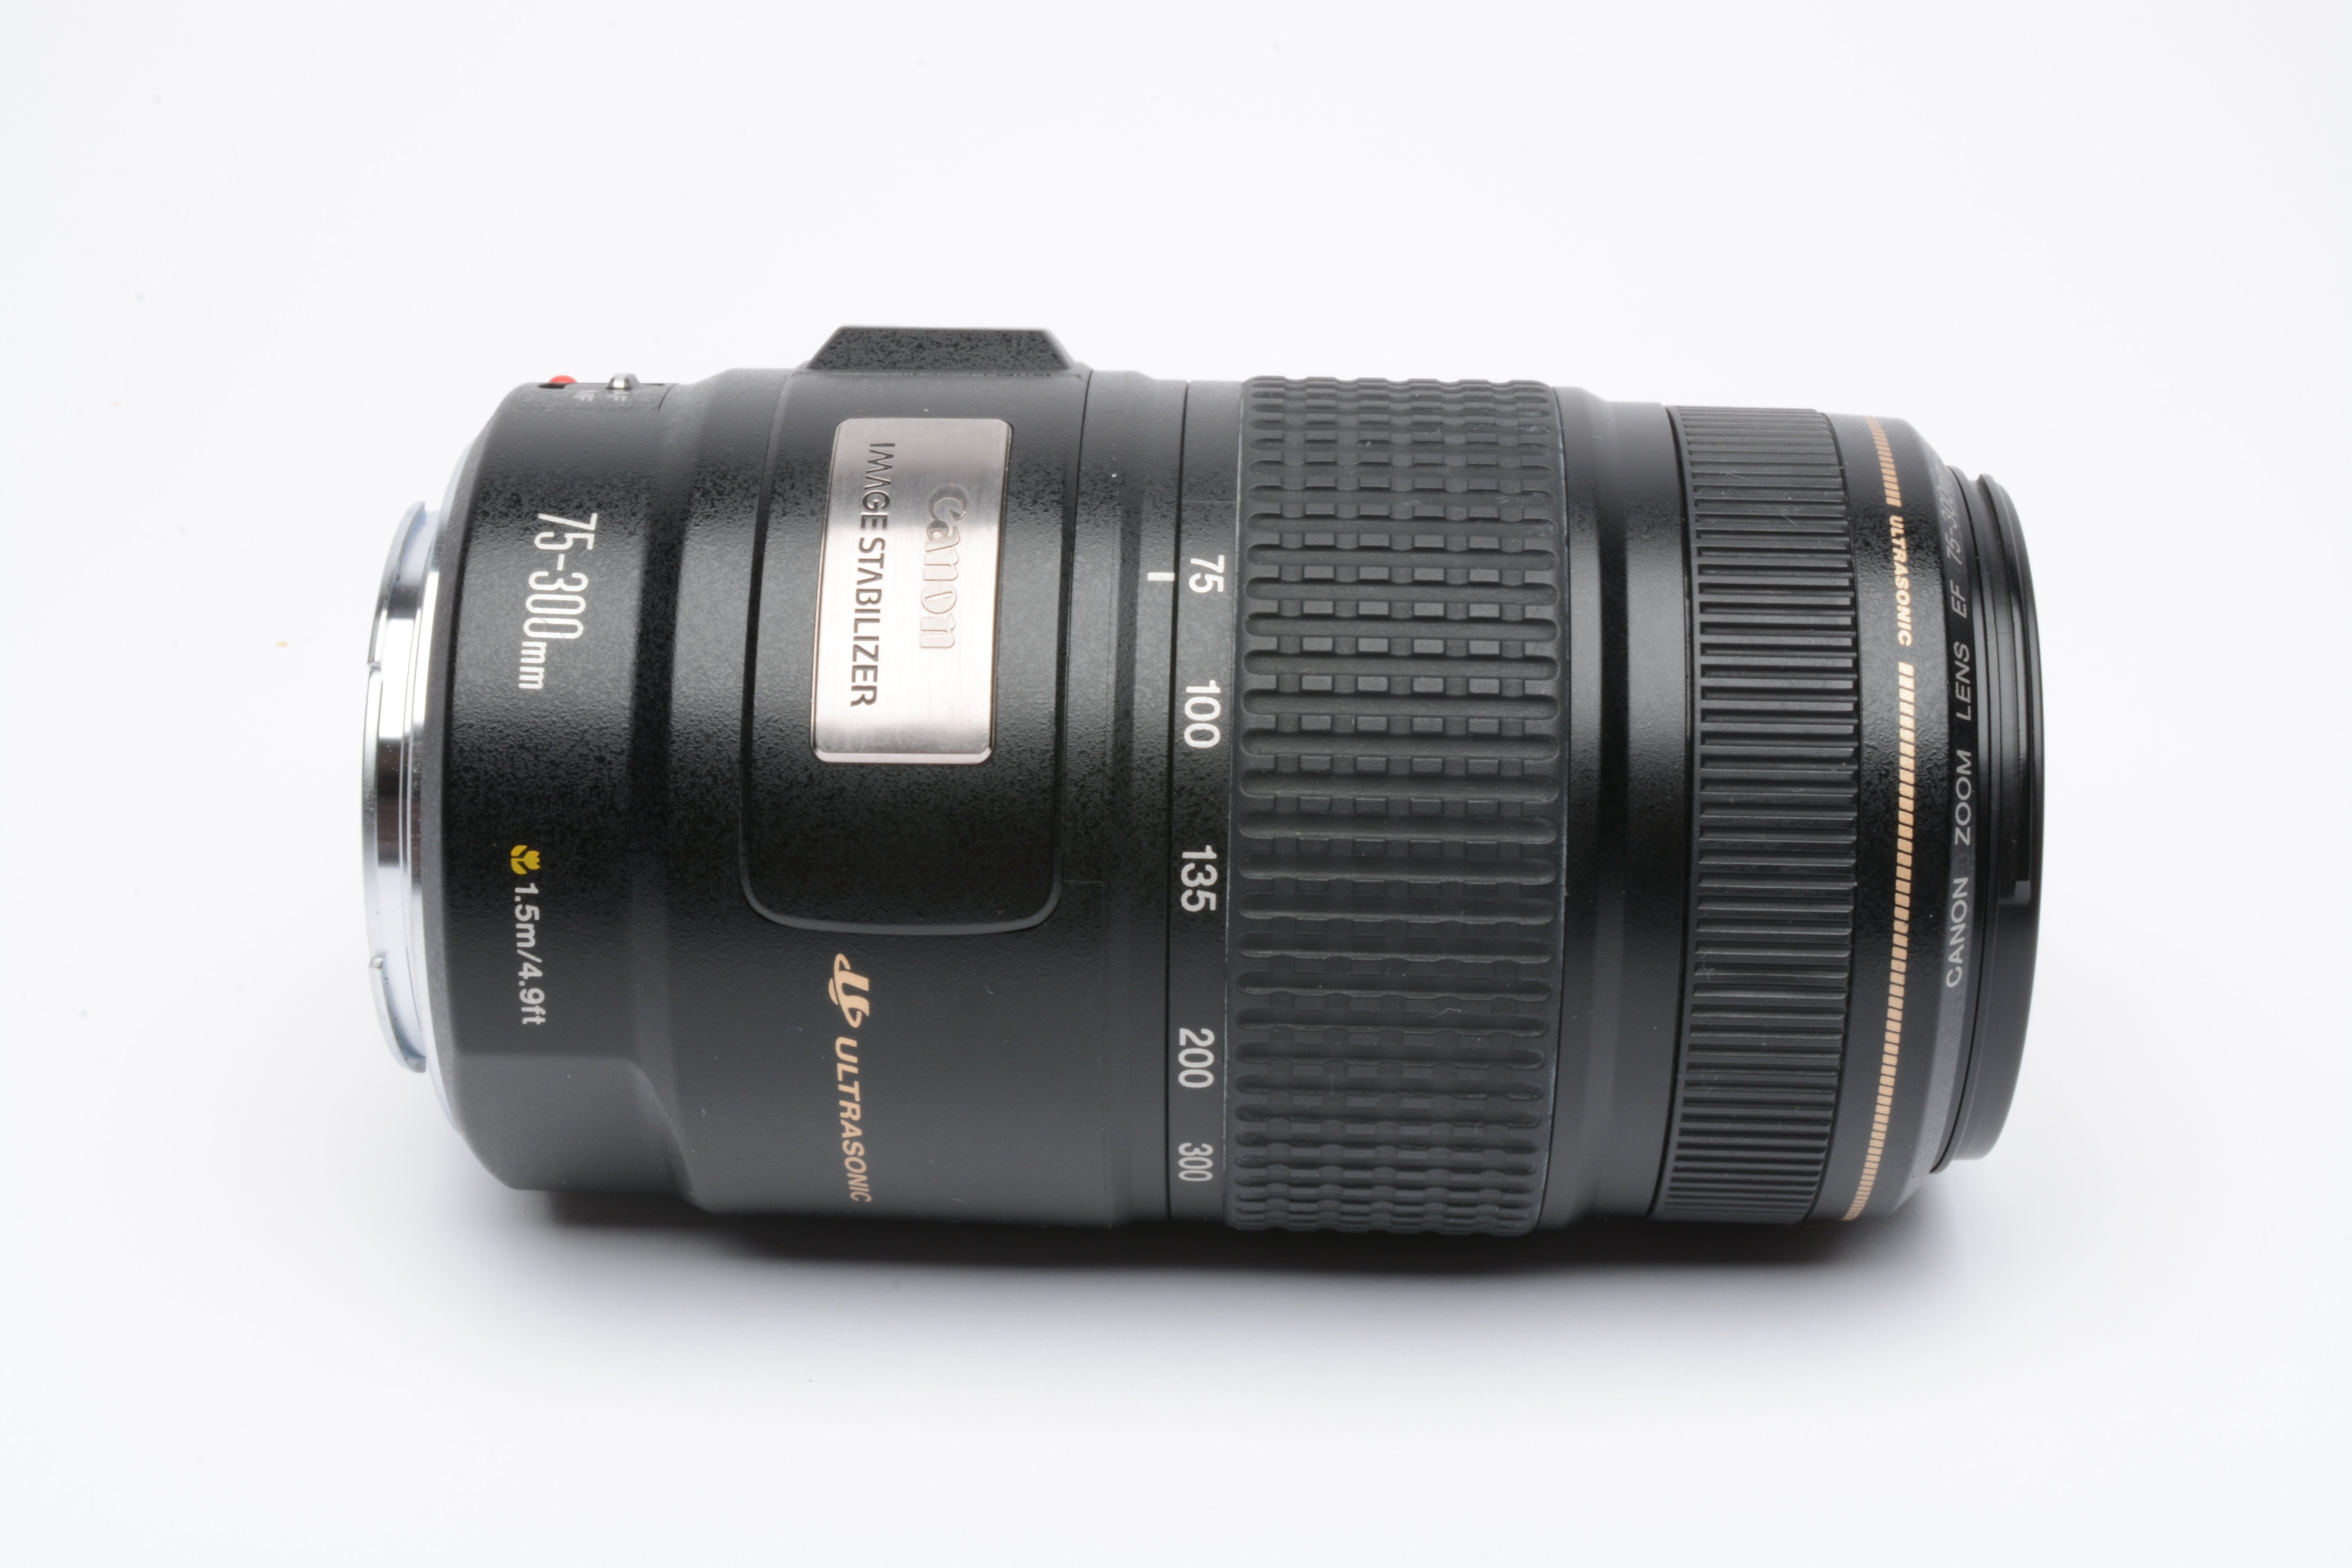 Canon EF 75-300mm f4-5.6 IS USM zoom lens, UV+Caps, very clean